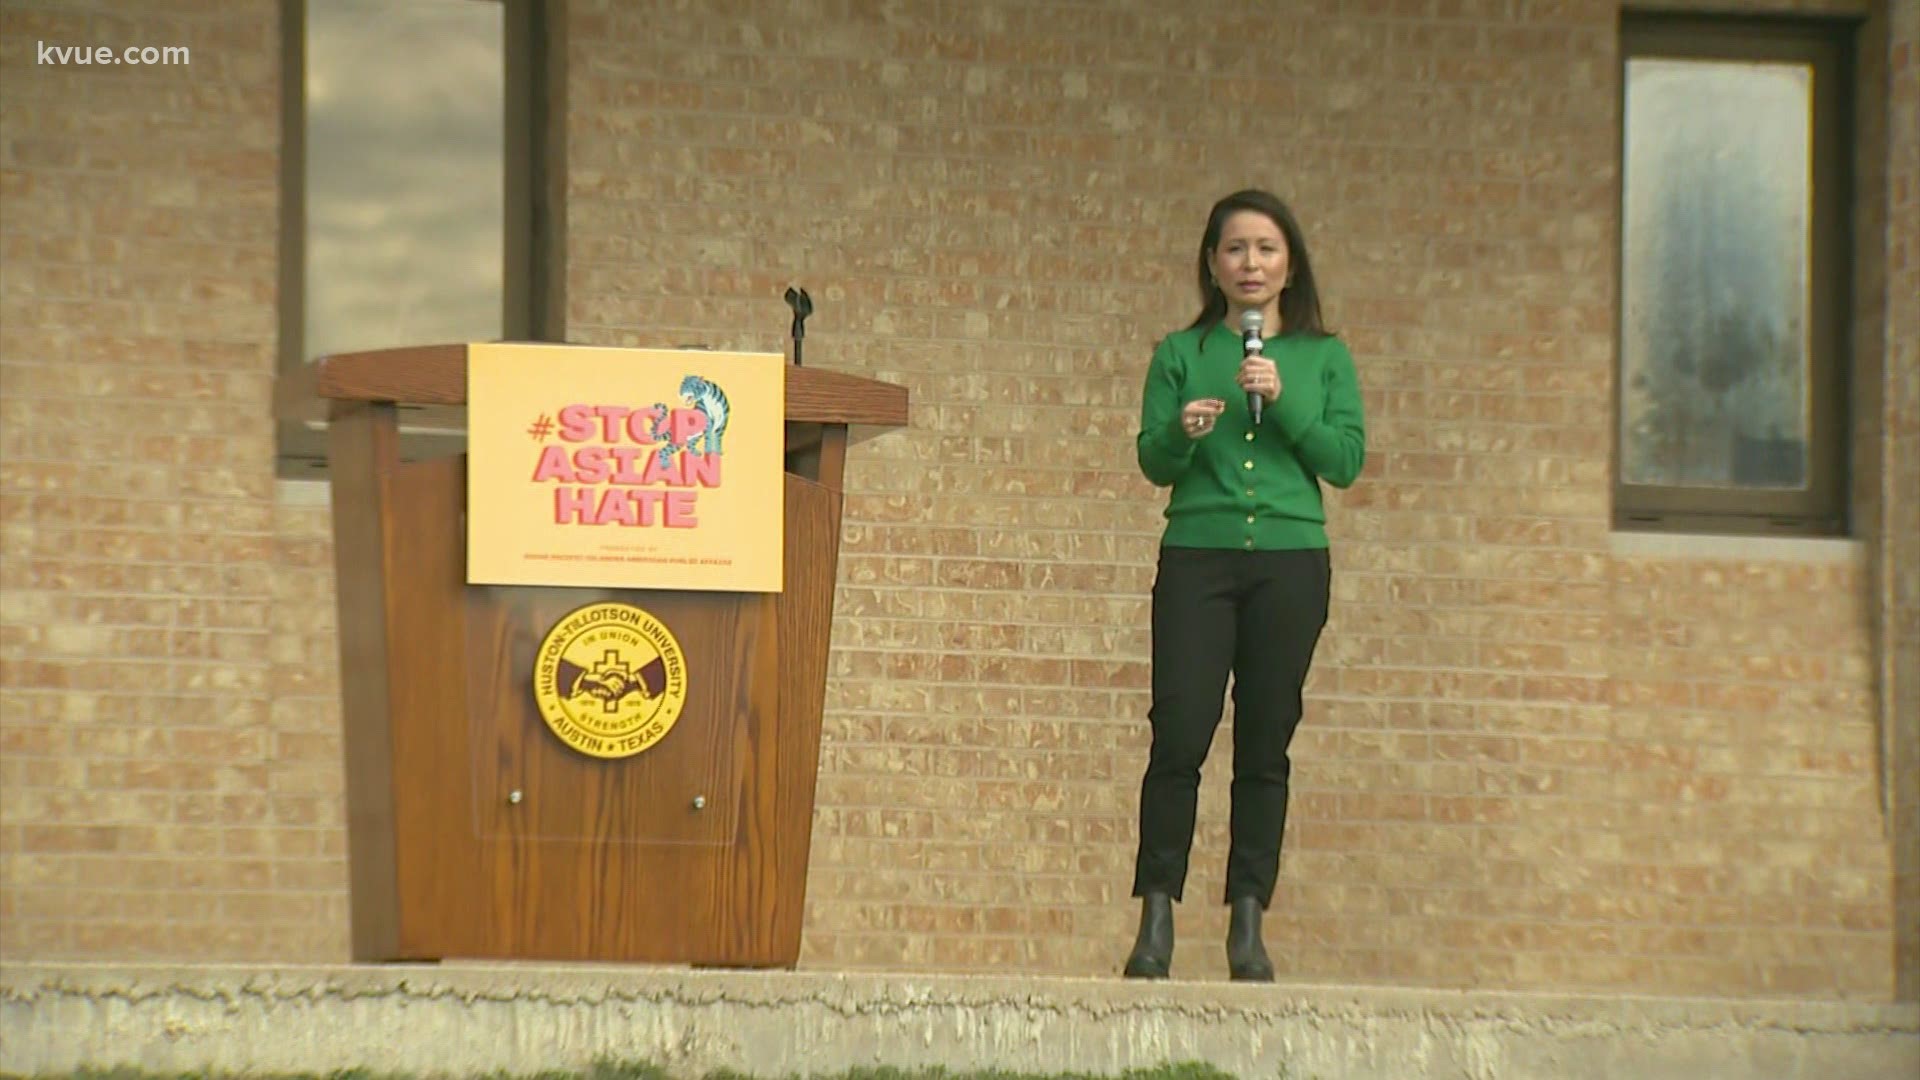 The Austin community gathered for the 'Stop Asian Hate' rally on Saturday afternoon. KVUE's Jenni Lee spoke at the event.